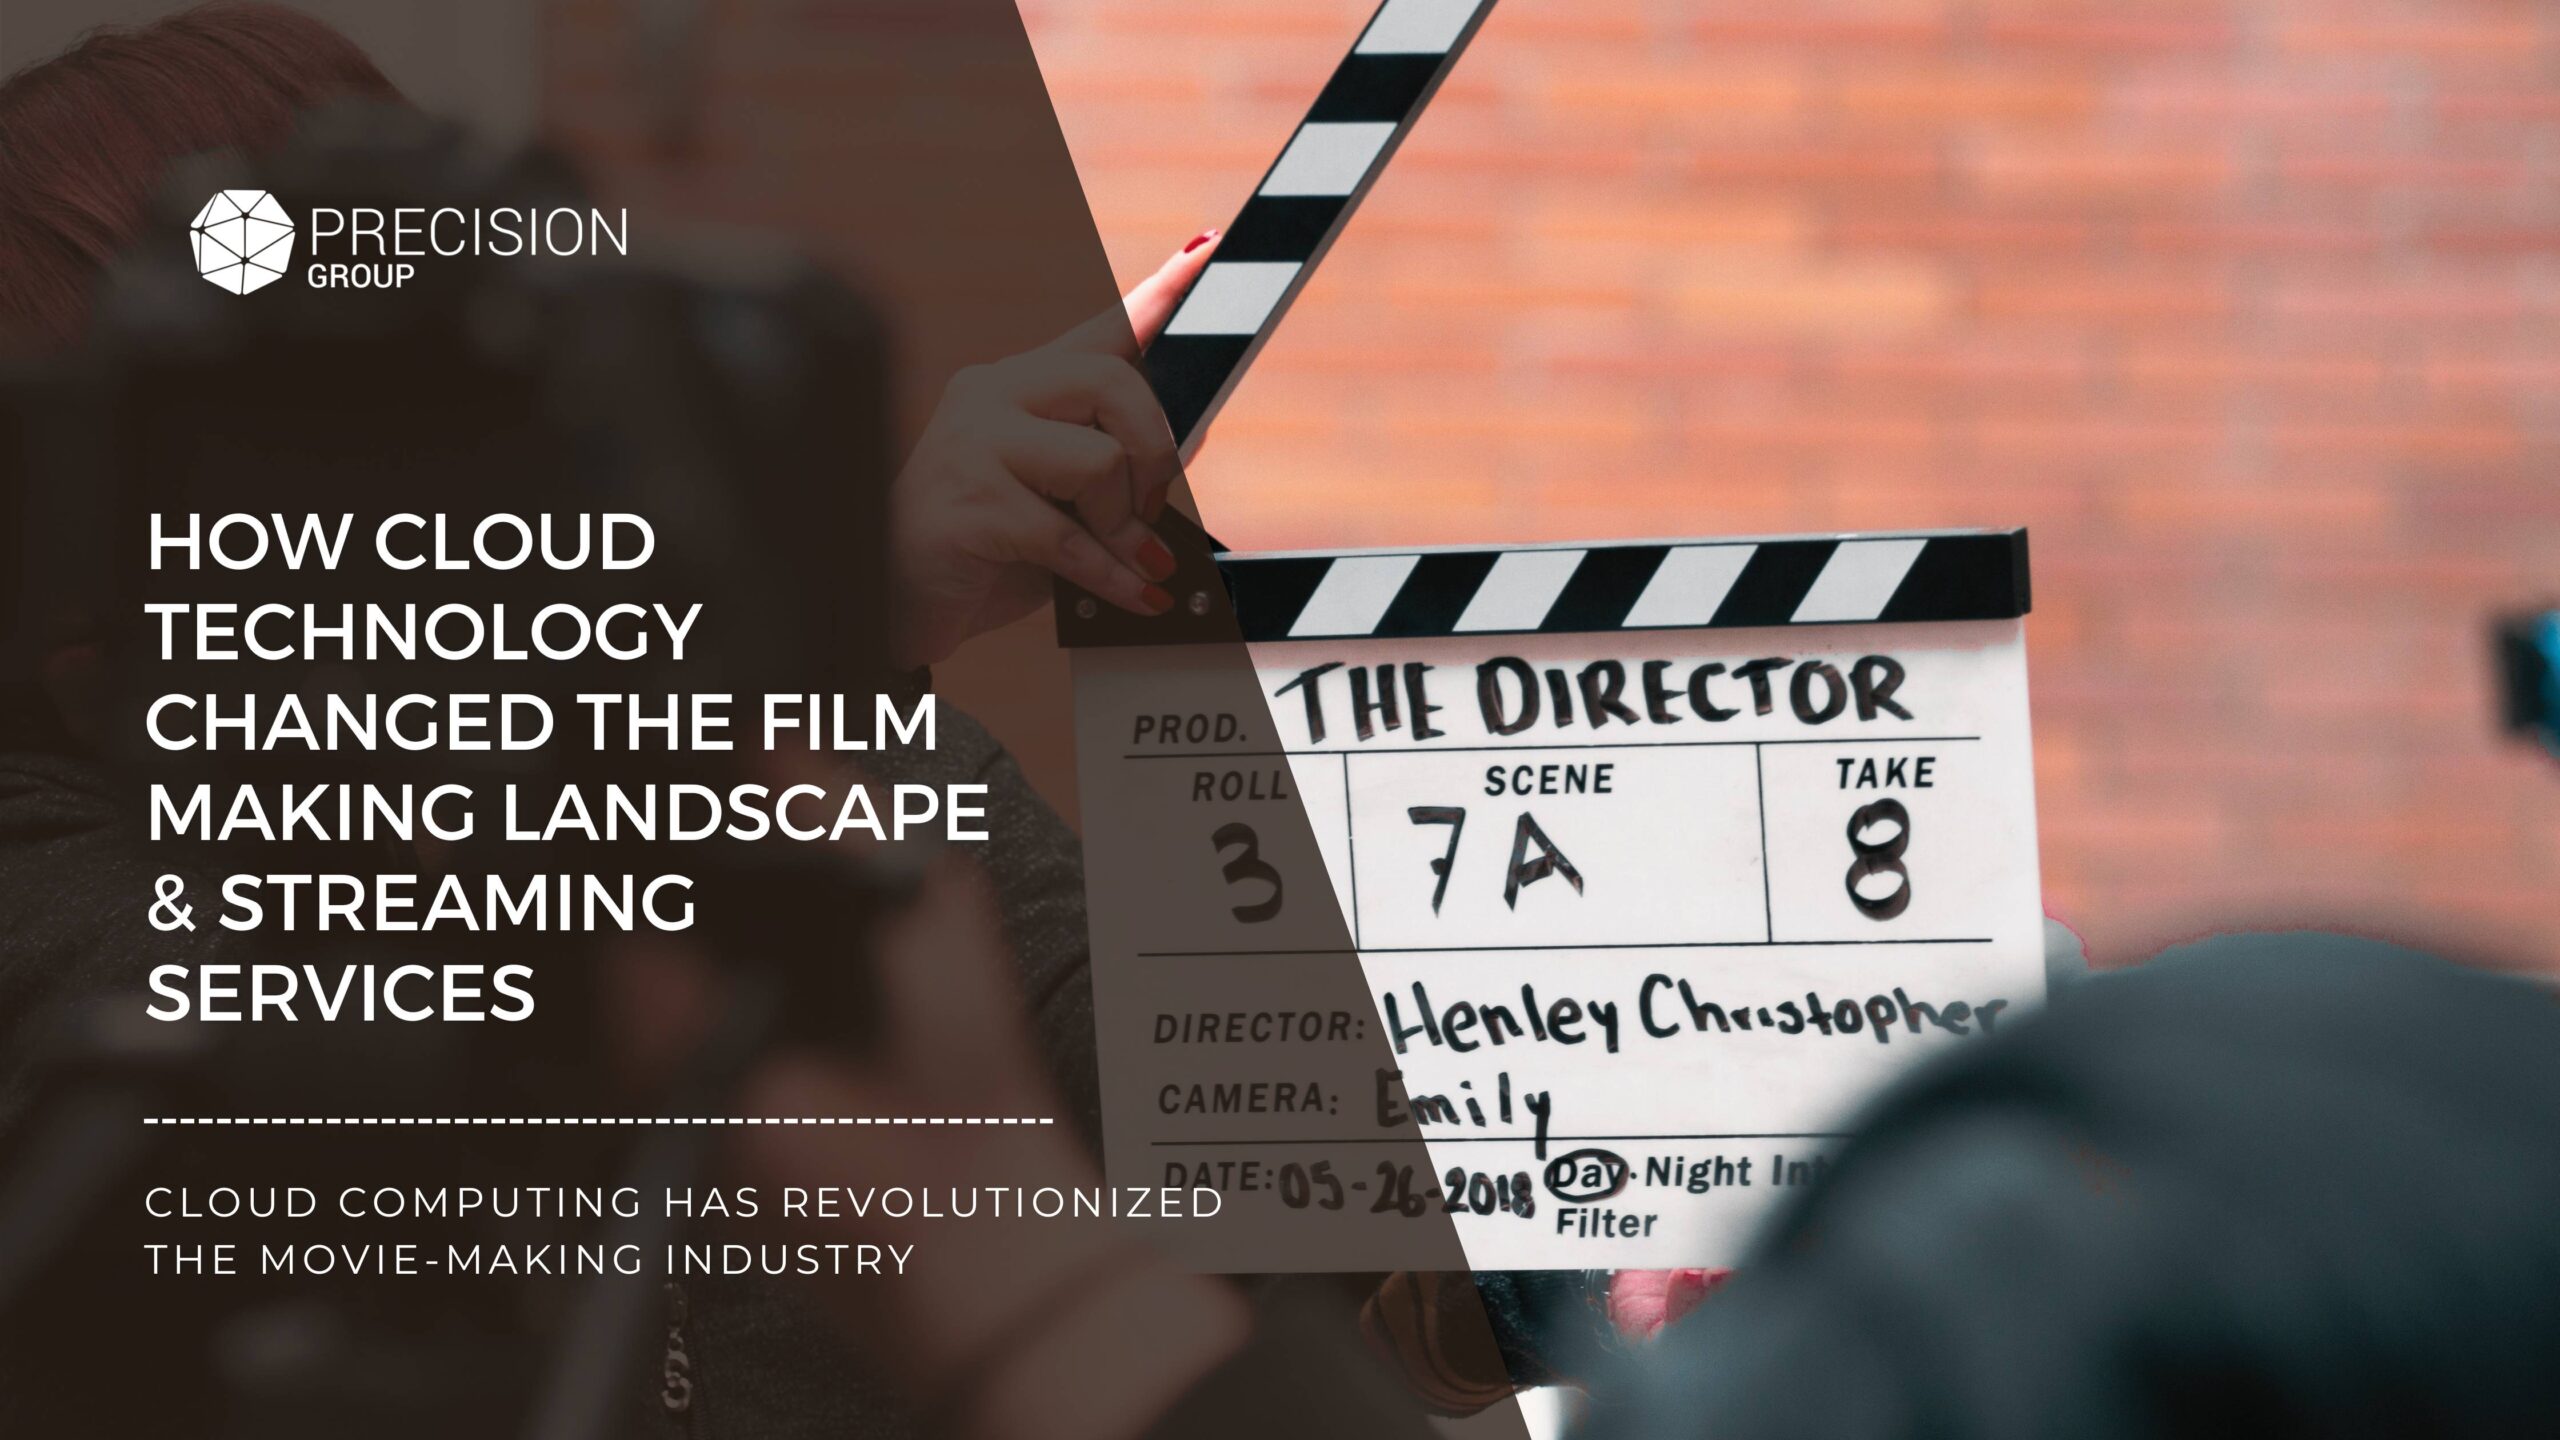 HOW CLOUD TECHNOLOGY CHANGED THE FILM MAKING LANDSCAPE & STREAMING SERVICES